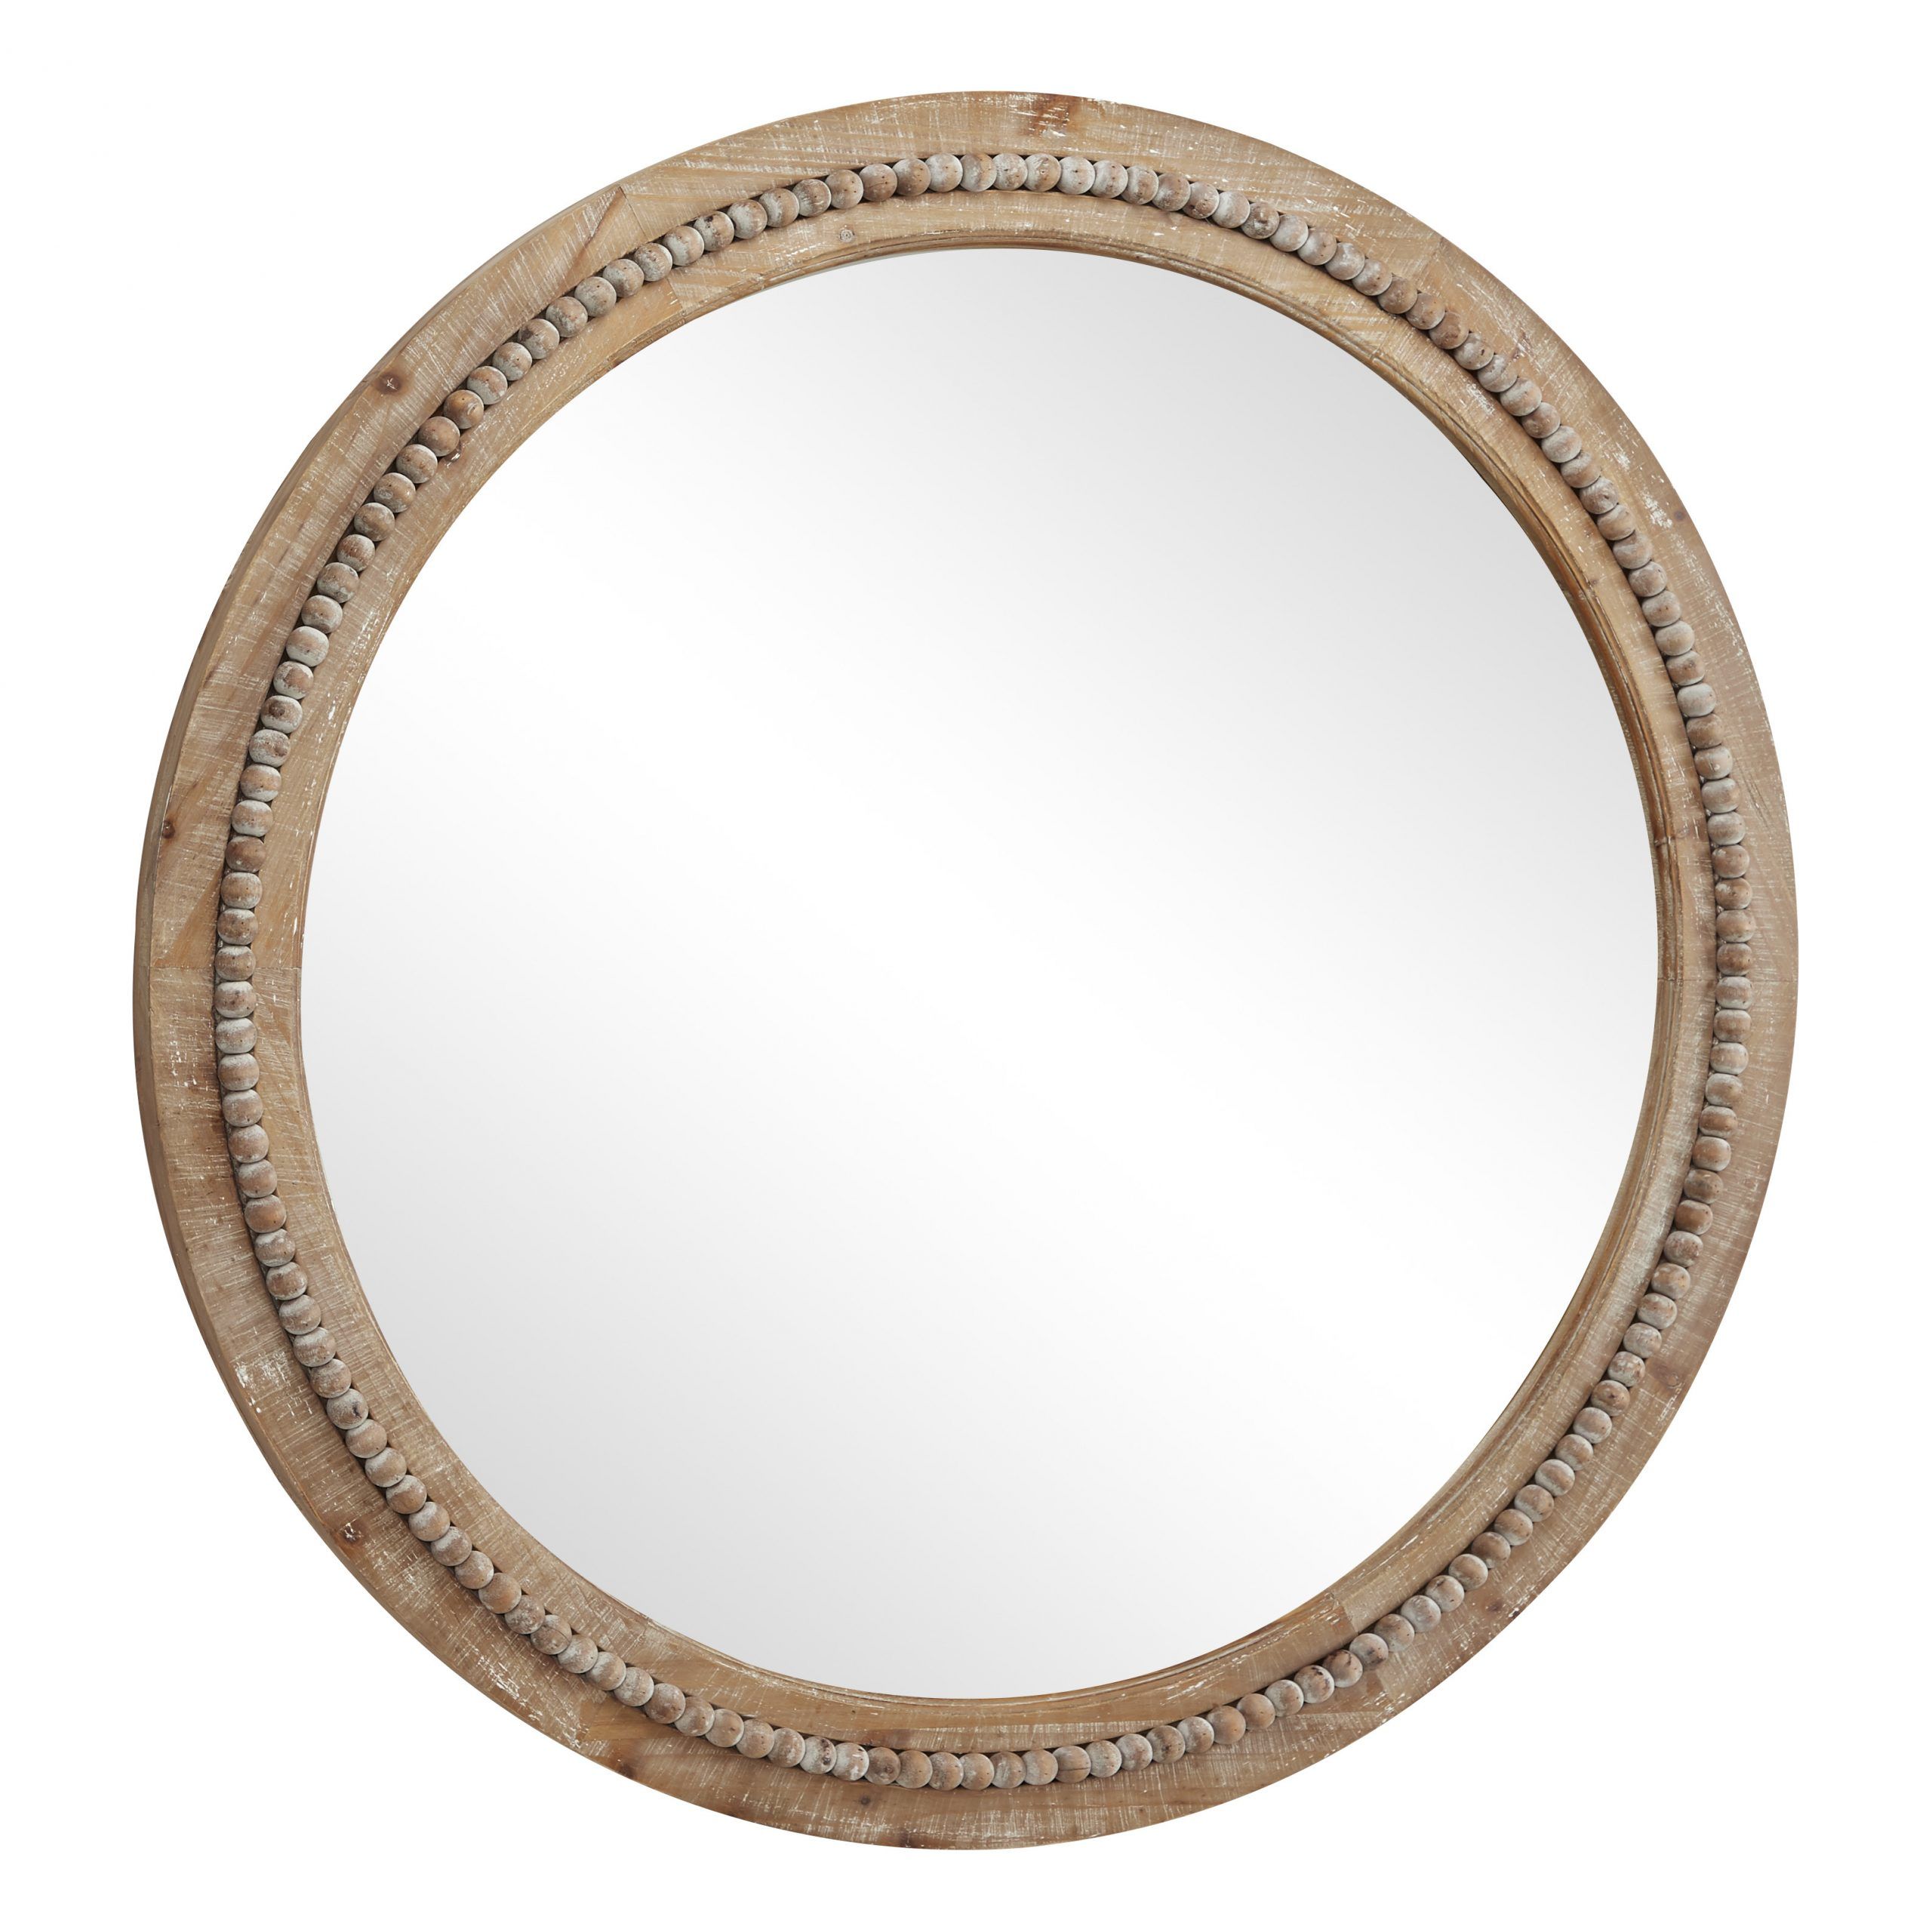 Decmode – 36" Large Round Natural Wood Wall Mirror W/ Decorative Wood In Matthias Round Accent Mirrors (View 10 of 15)